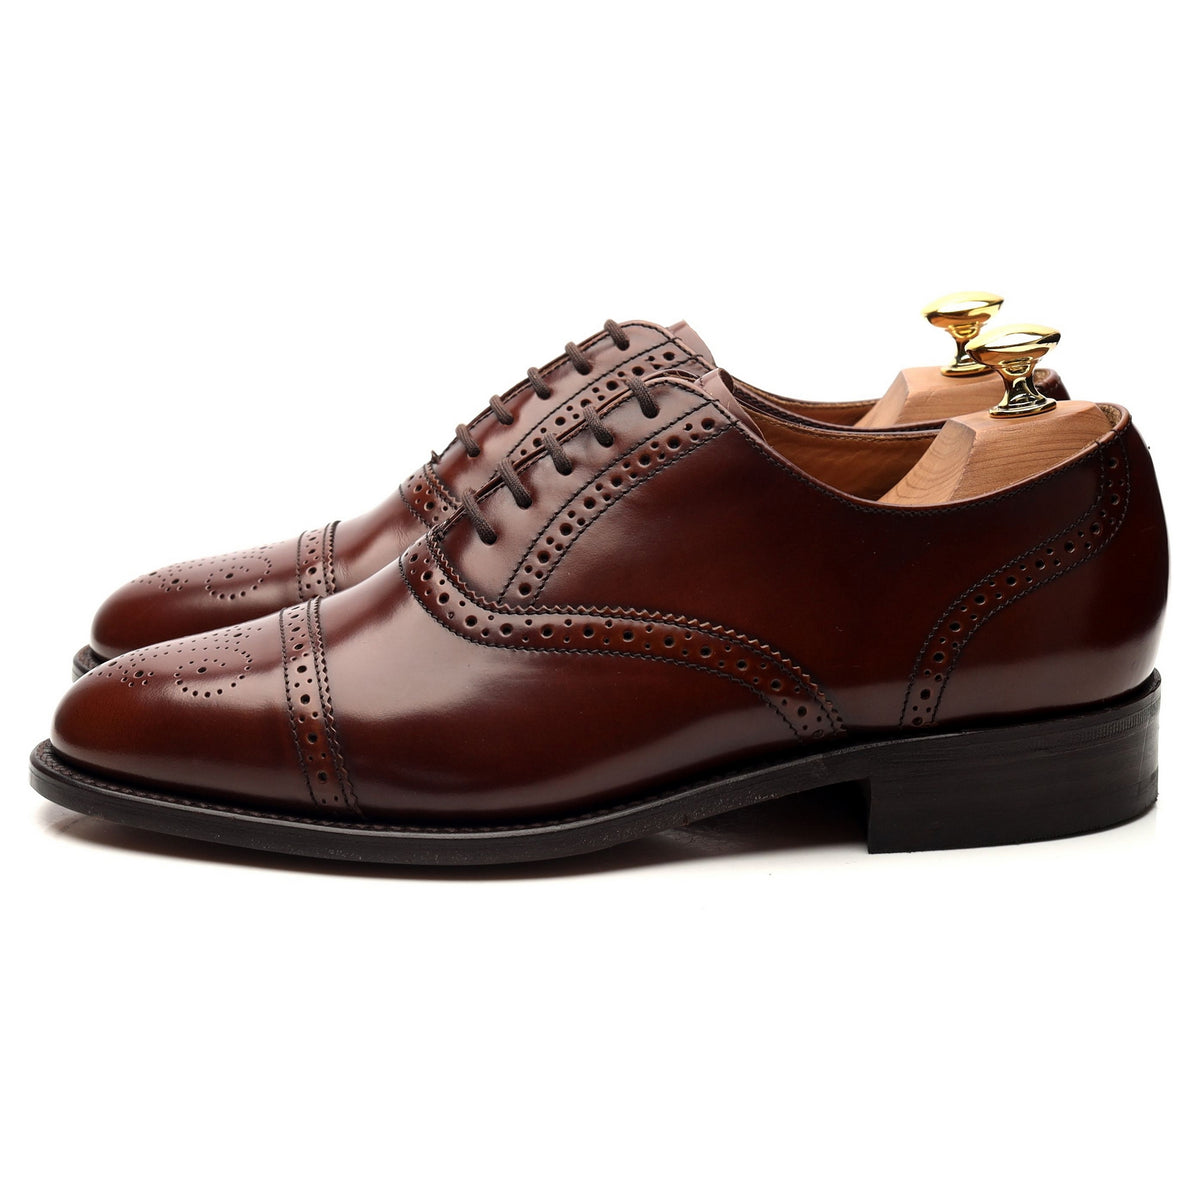 Brown Leather Oxford Brogues UK 6.5 G